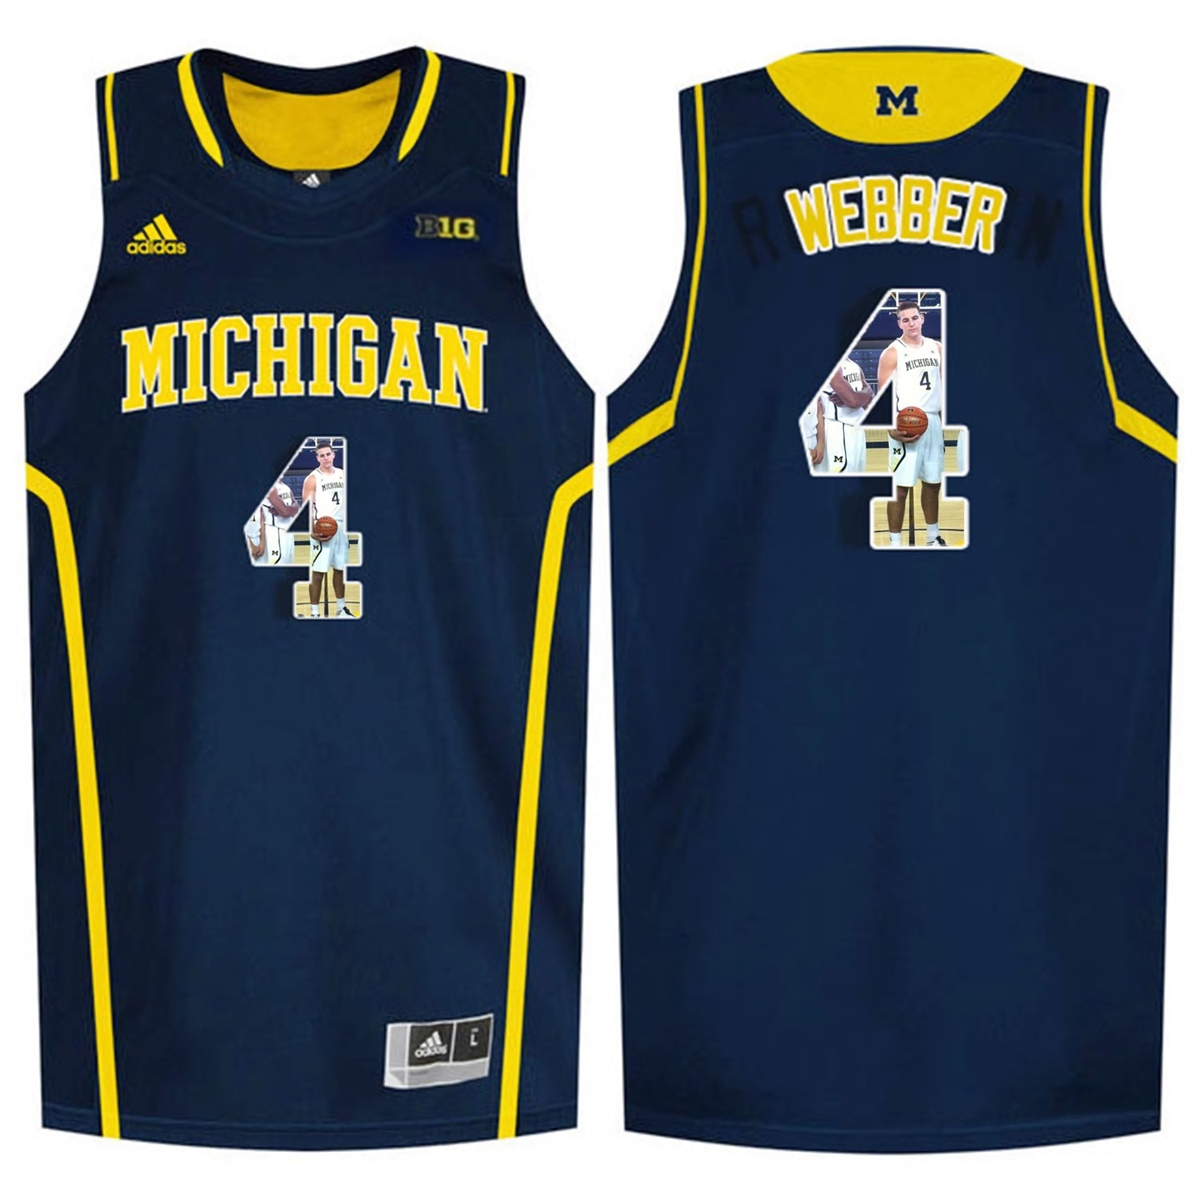 Michigan Wolverines Men's NCAA Chirs Webber #4 Navy Blue Player Art Player Pictorial Tank Top College Basketball Jersey SYM5849ON